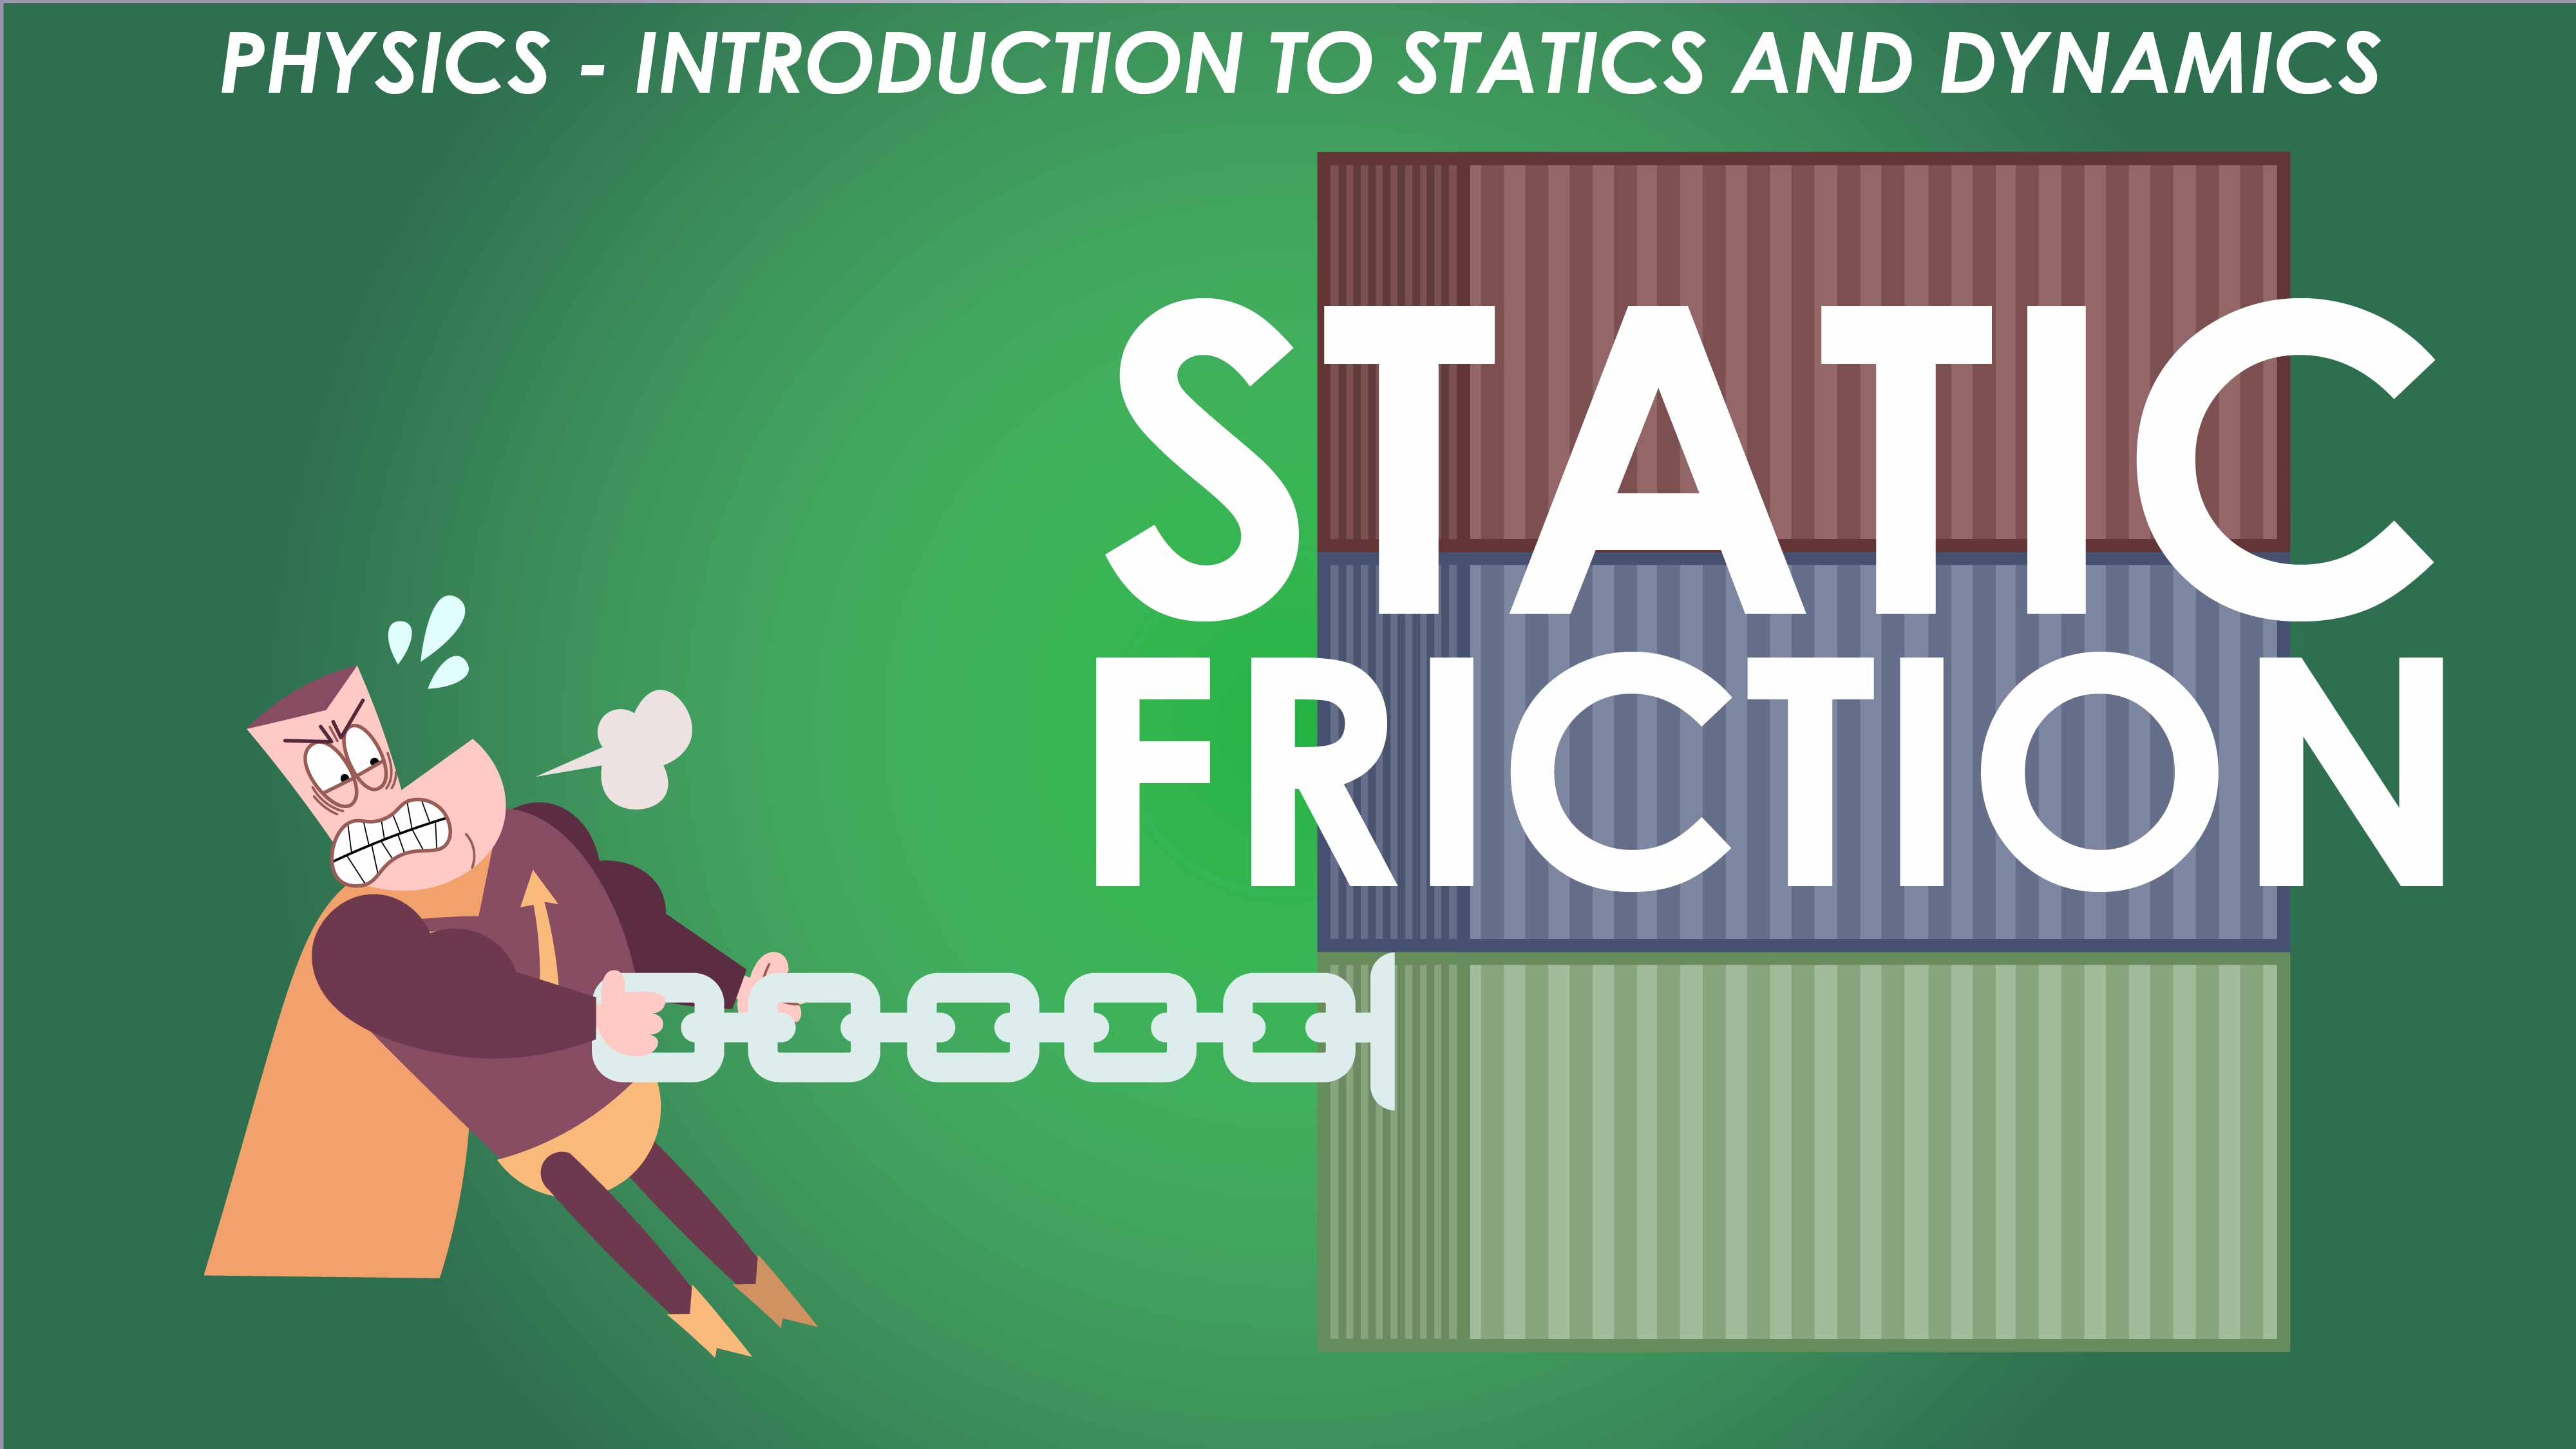 Static Friction - Forces and Newton’s Laws